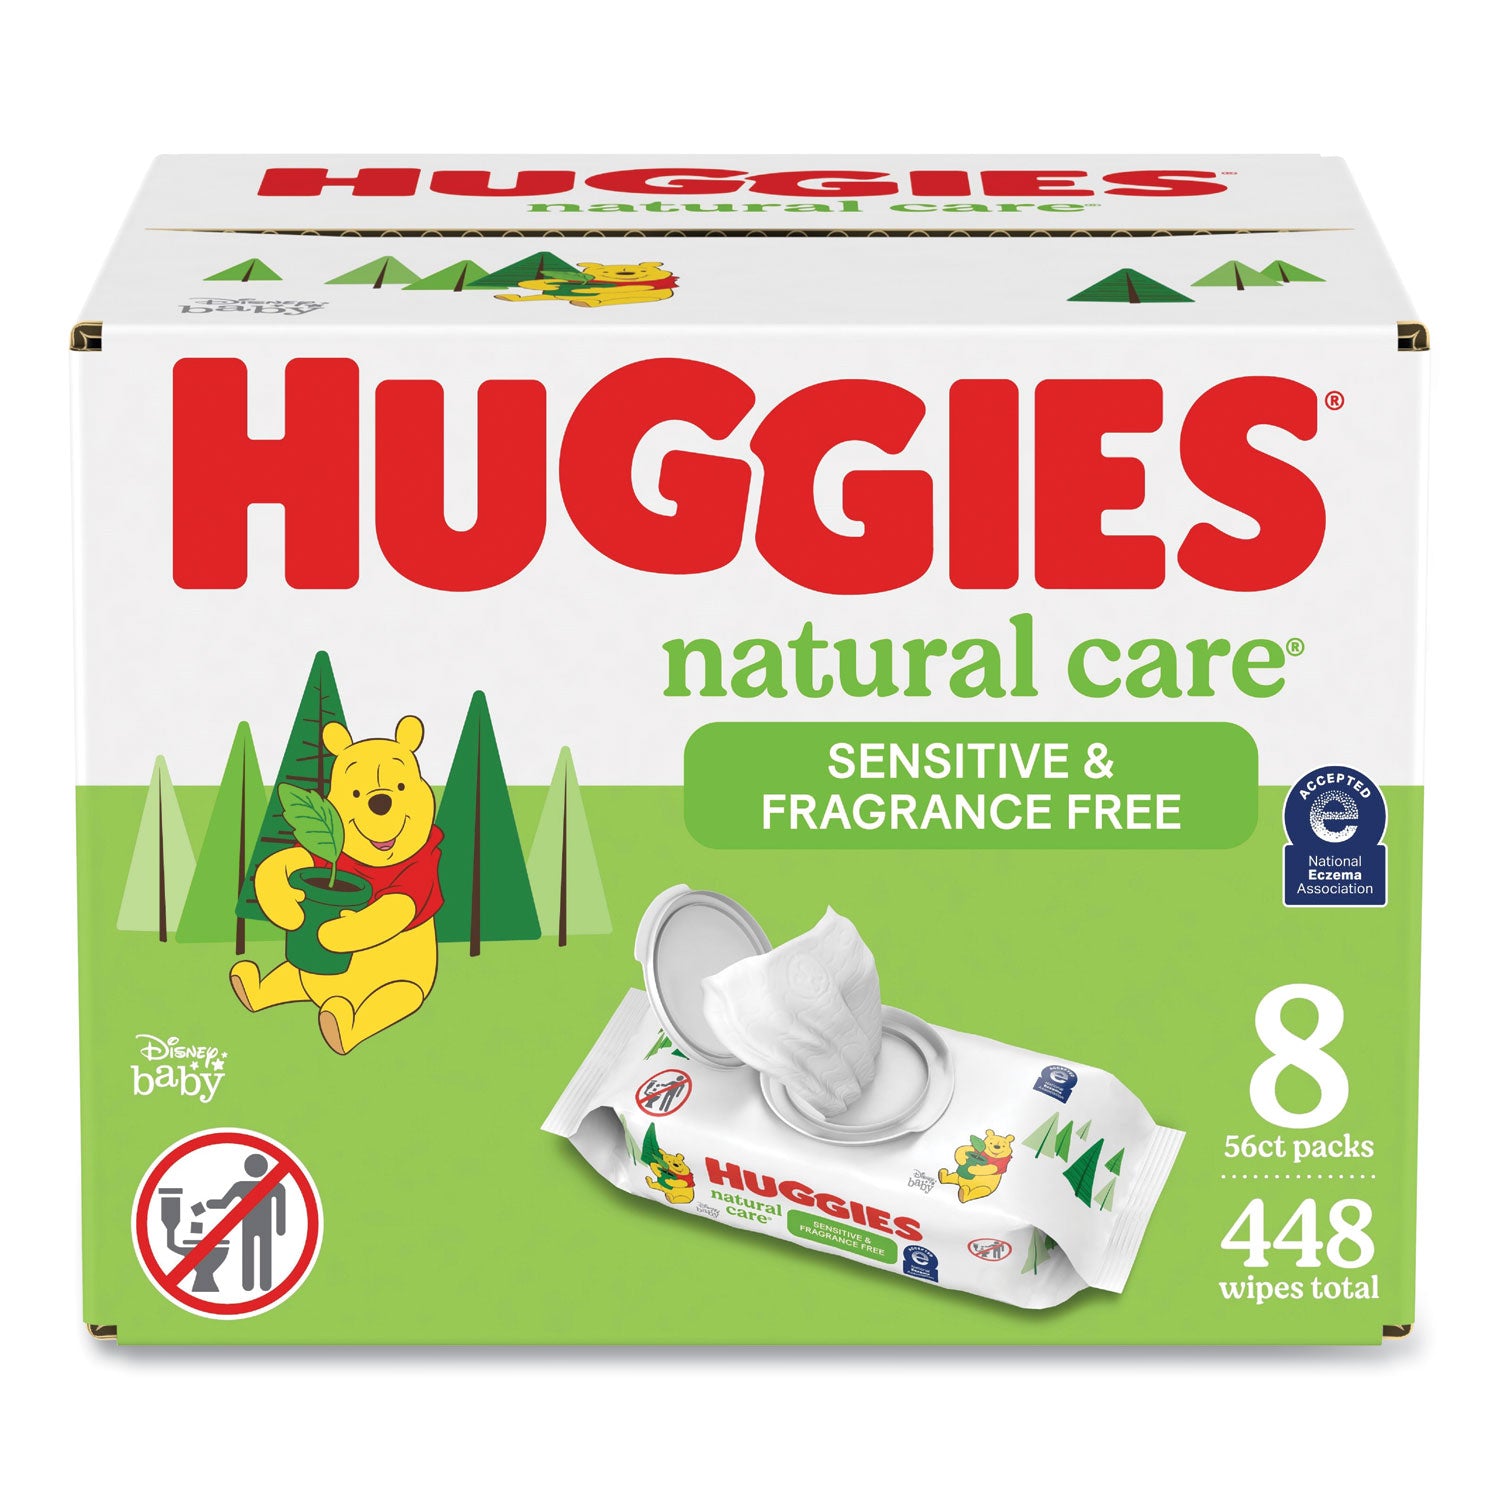 natural-care-sensitive-baby-wipes-1-ply-388-x-66-unscented-white-56-pack-8-packs-carton_kcc31803 - 2